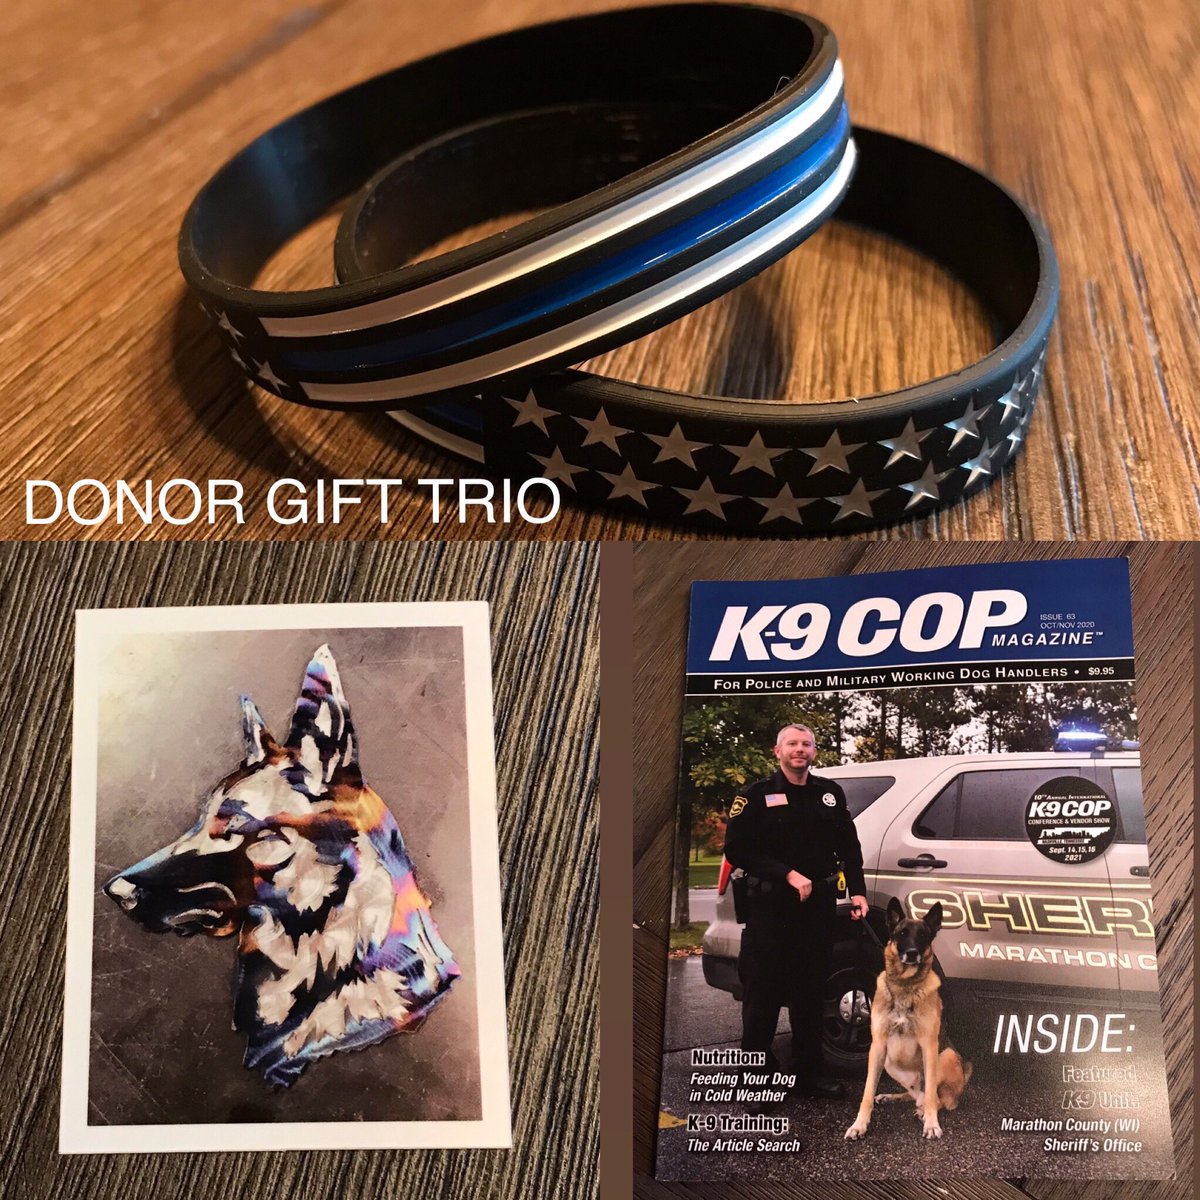 HOODIE GIVEAWAY! To enter: -Follow @K9Hawaii -Like & RT This nonprofit is working very hard to provide K9s w/MUCH needed support! You can get 10 extra entries into this giveaway by helping them: hik9s.org (DM receipt 2 me to qualify) ALL donors get a gift trio!